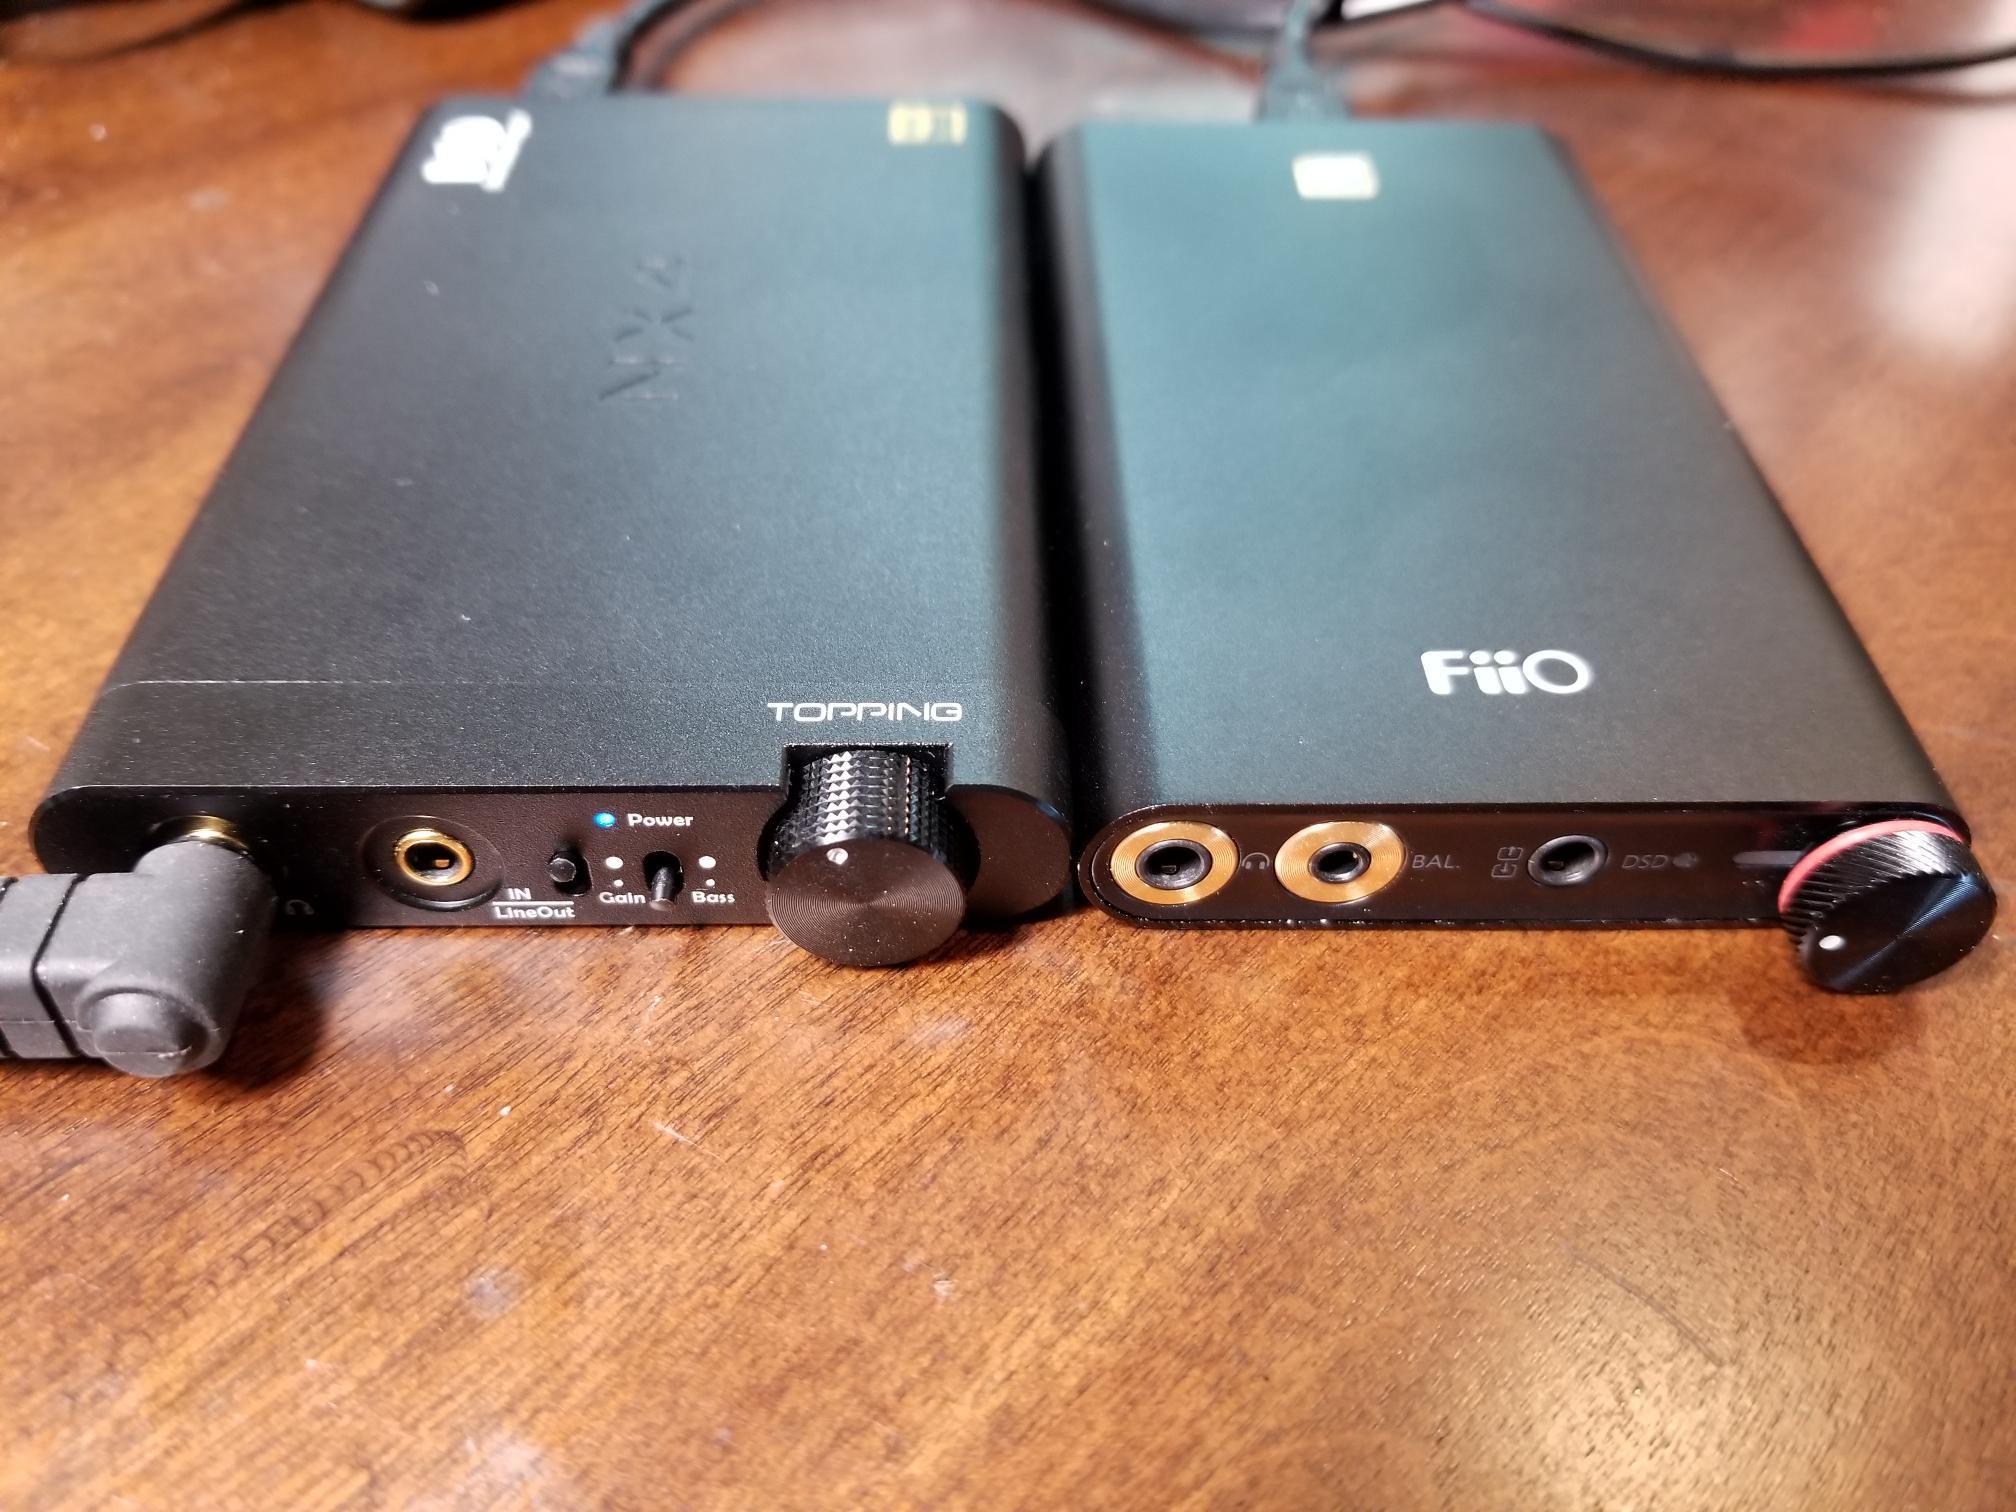 Review and Measurements of FiiO Q1 Mark II Portable DAC and 